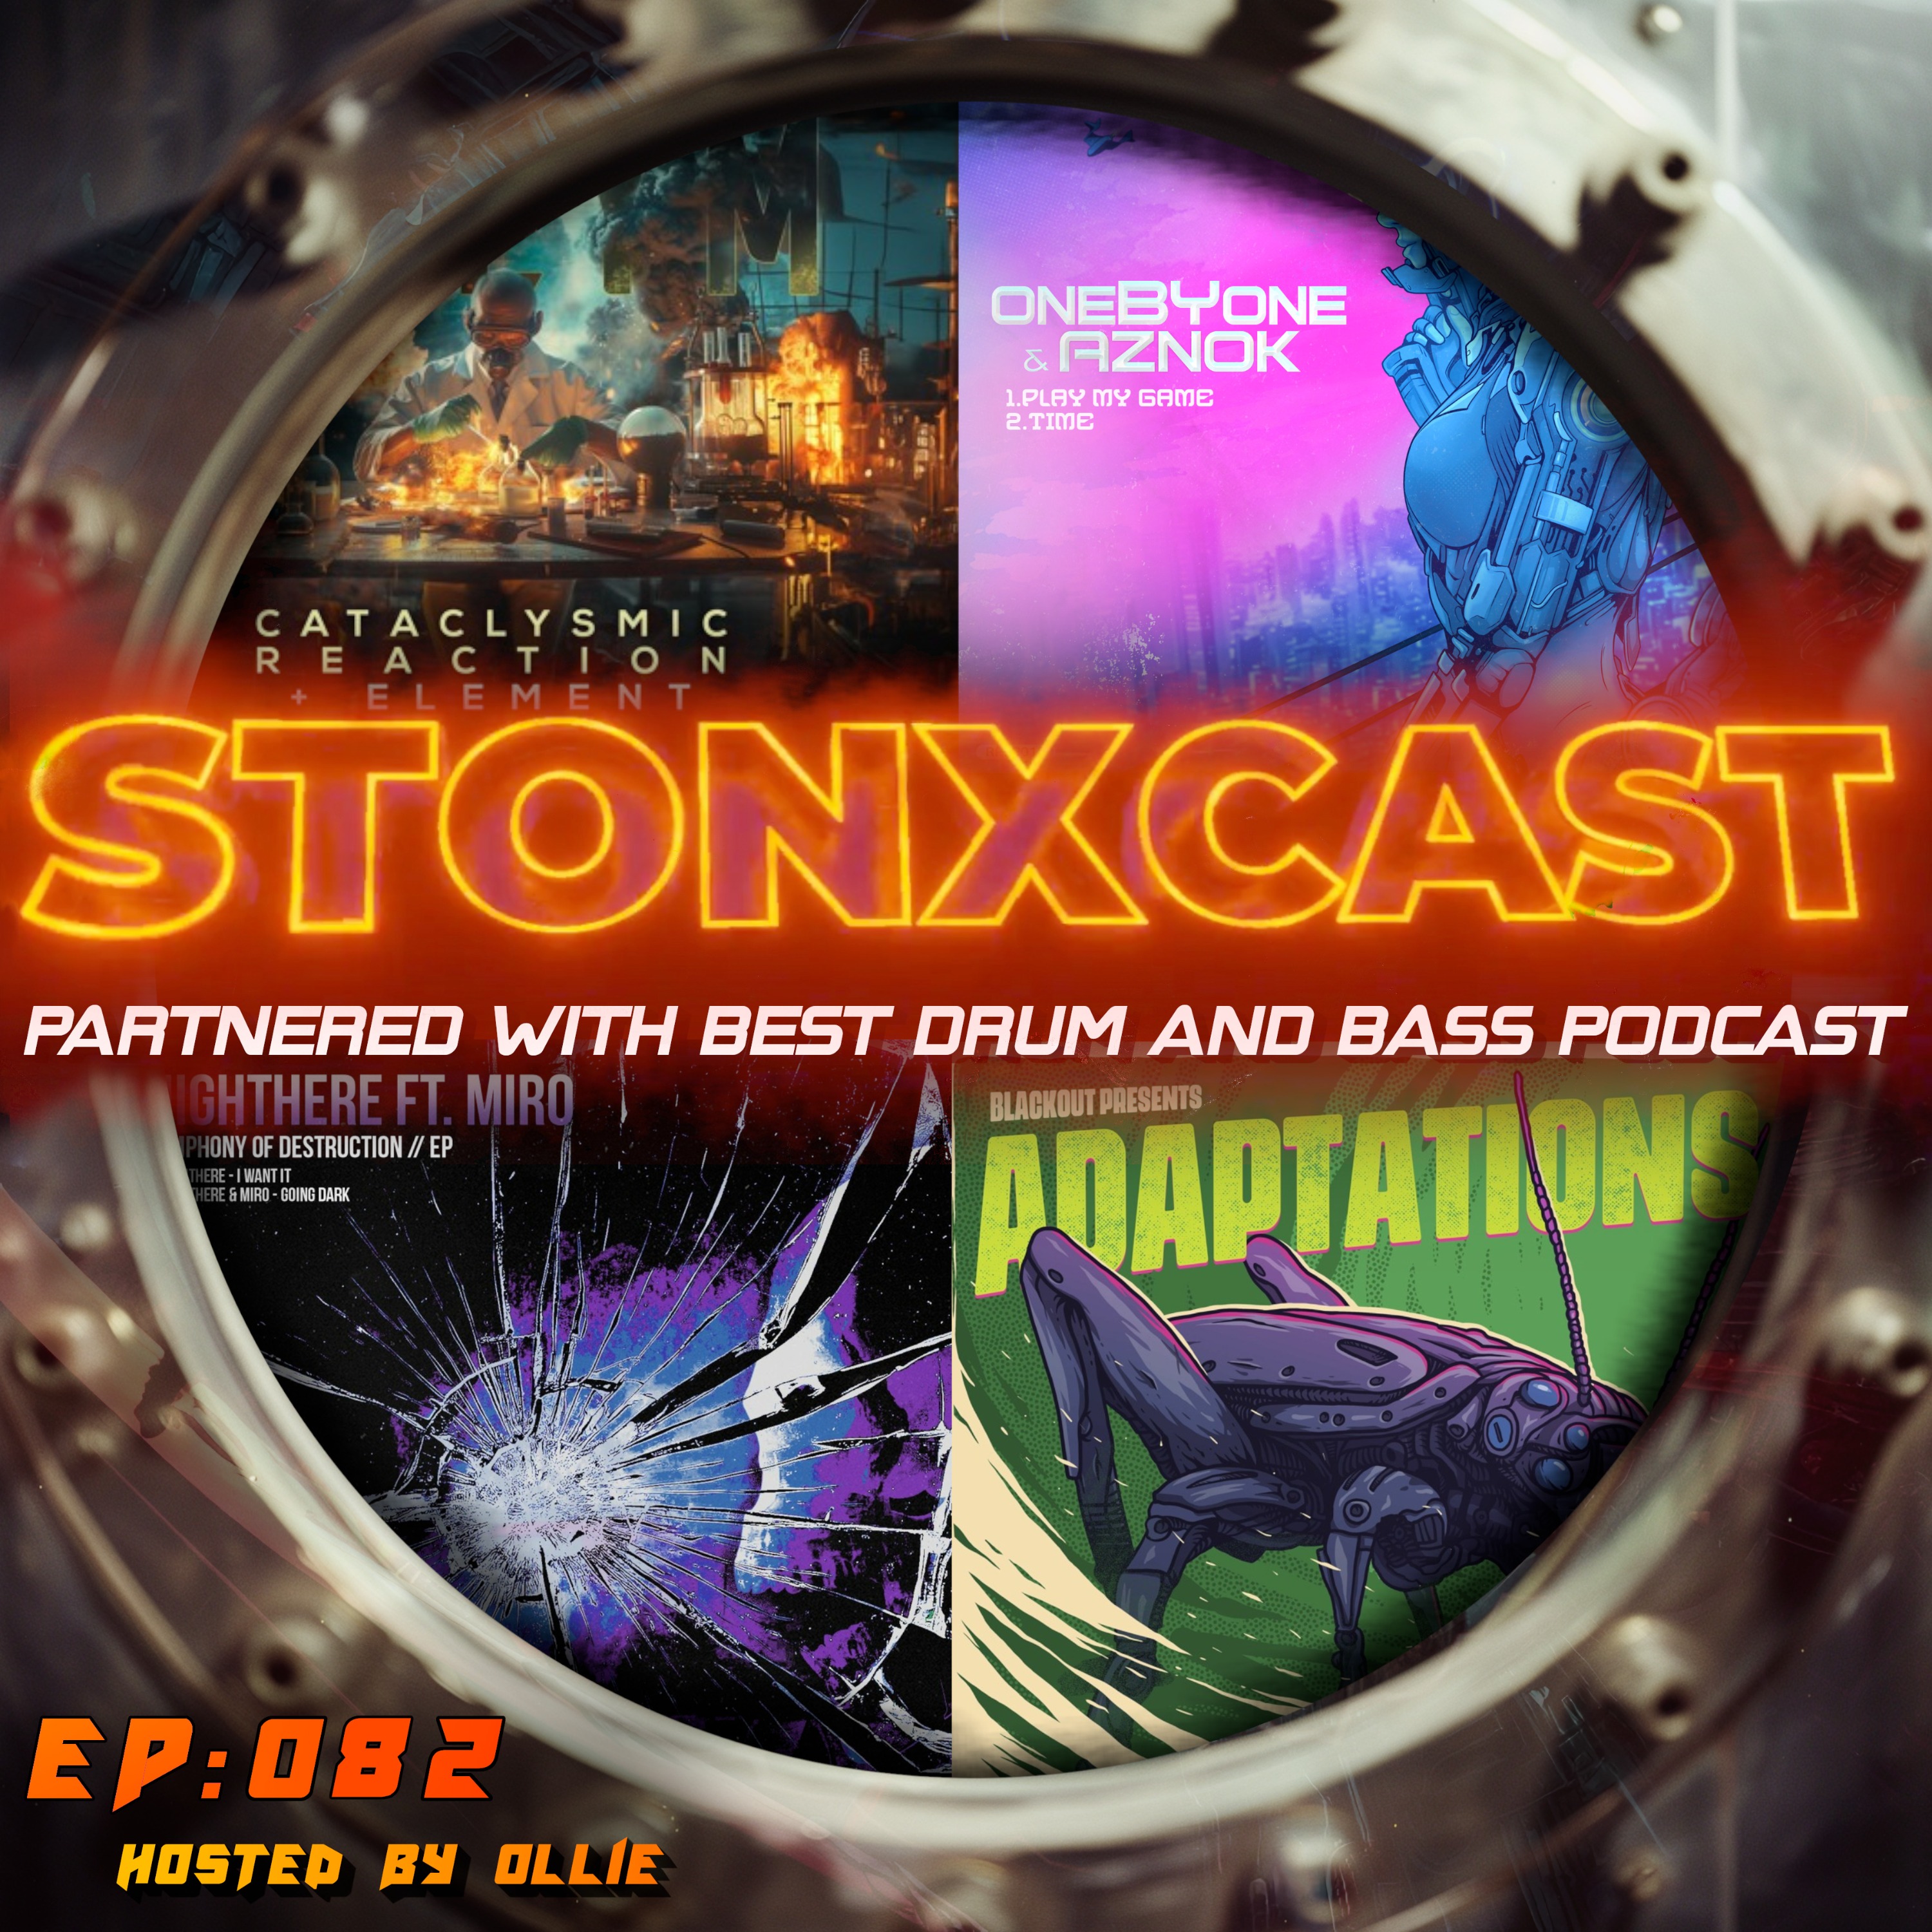 Stonxcast EP:082 - Hosted by Ollie Artwork